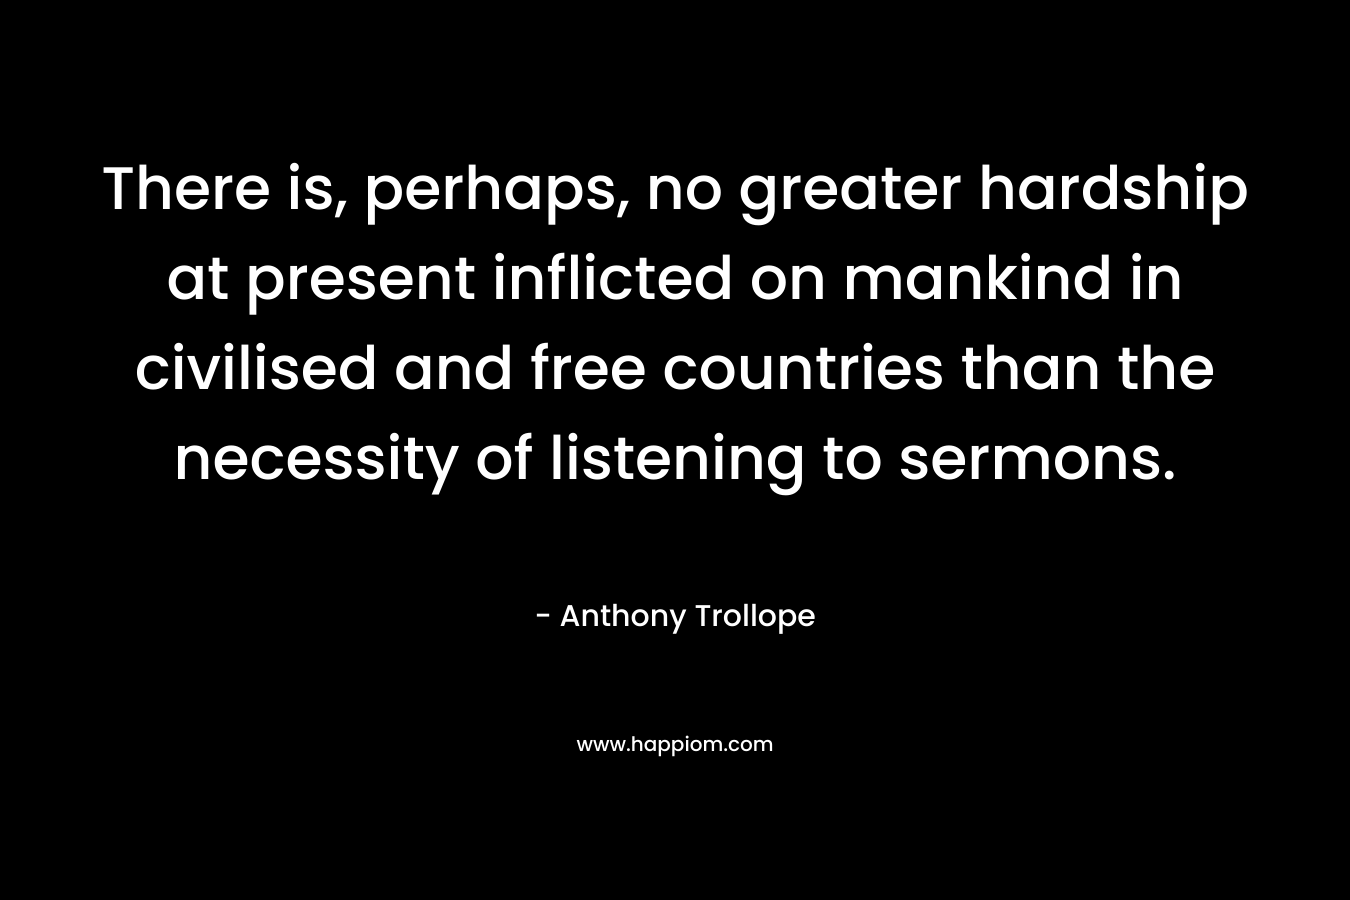 There is, perhaps, no greater hardship at present inflicted on mankind in civilised and free countries than the necessity of listening to sermons.